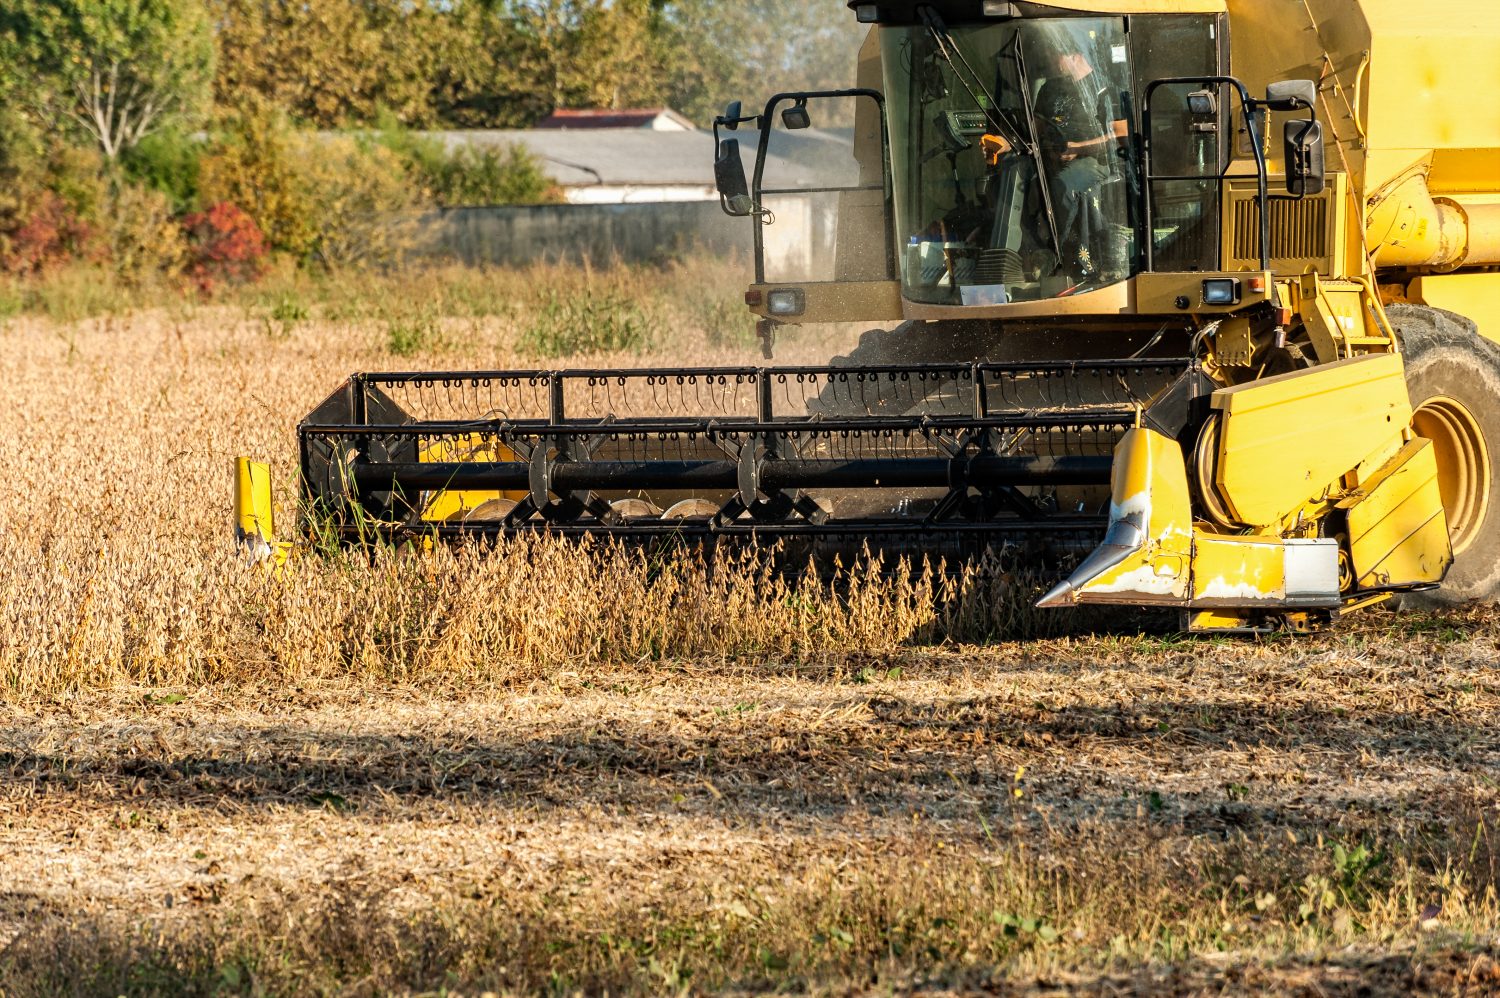 Harvesting Of Soybean Field With Combine Harvester.